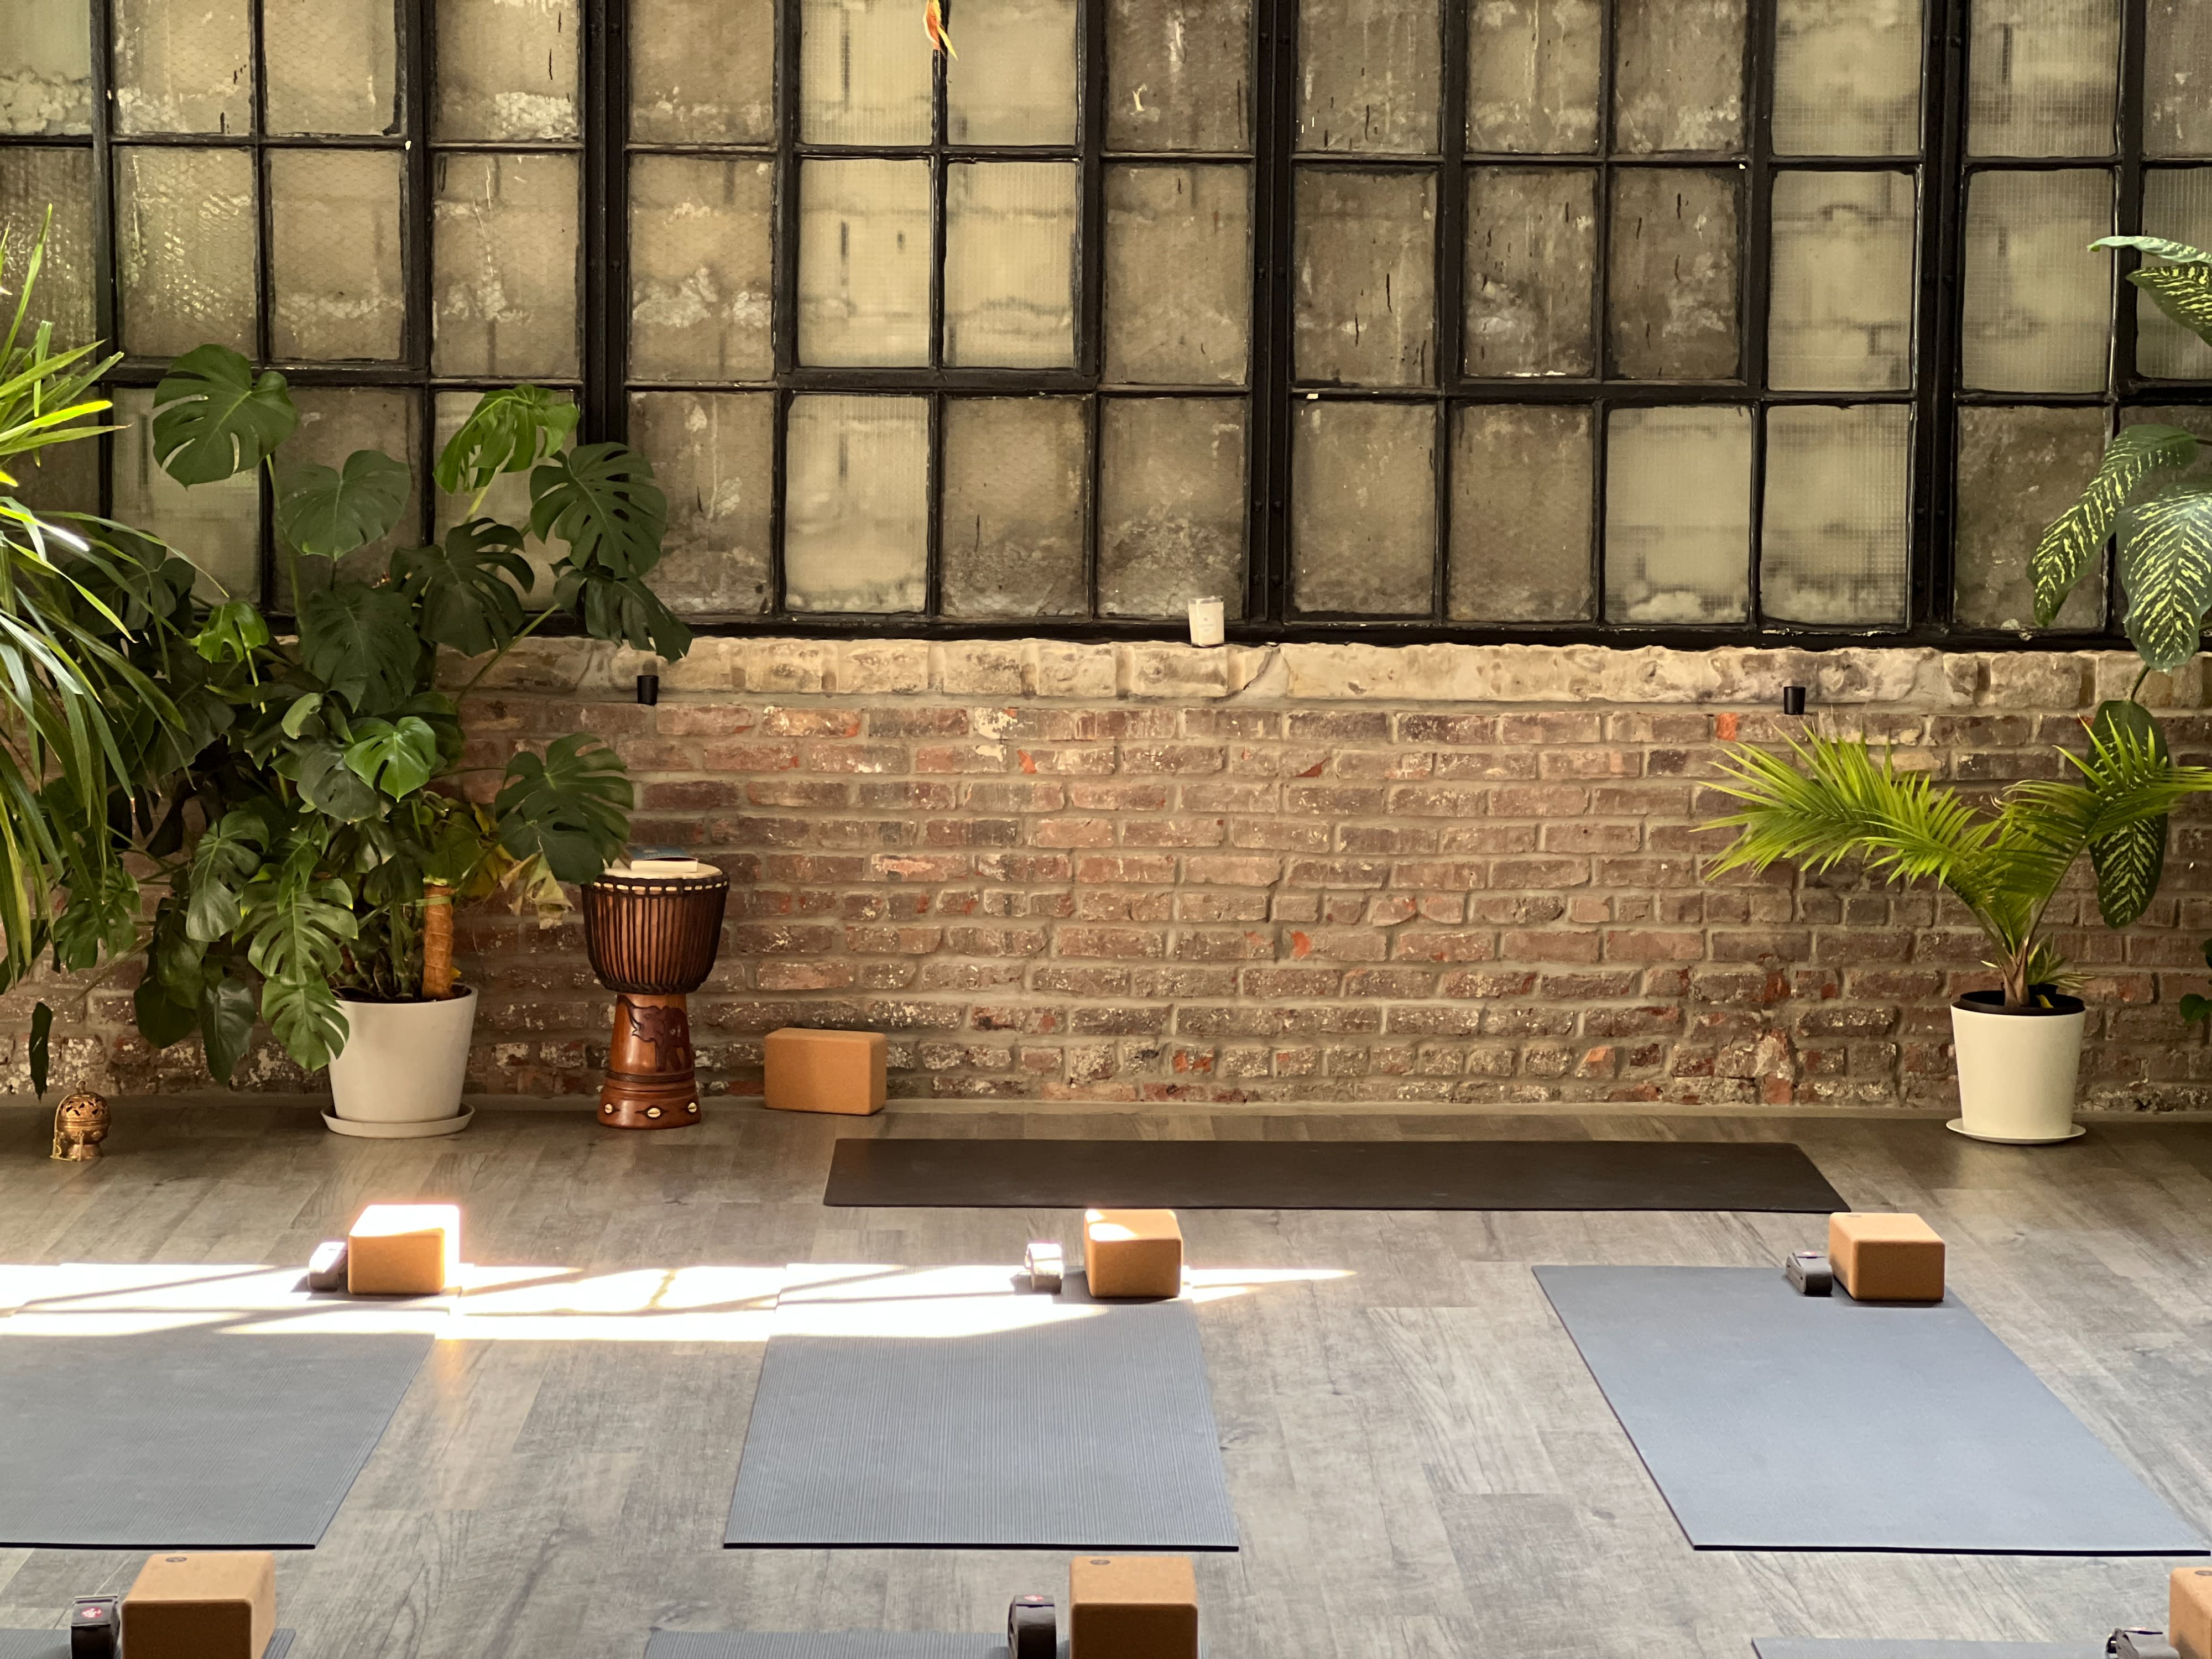 Authentic Yoga Studio in the heart of a Greenpoint, Brooklyn, NY, Off-Site